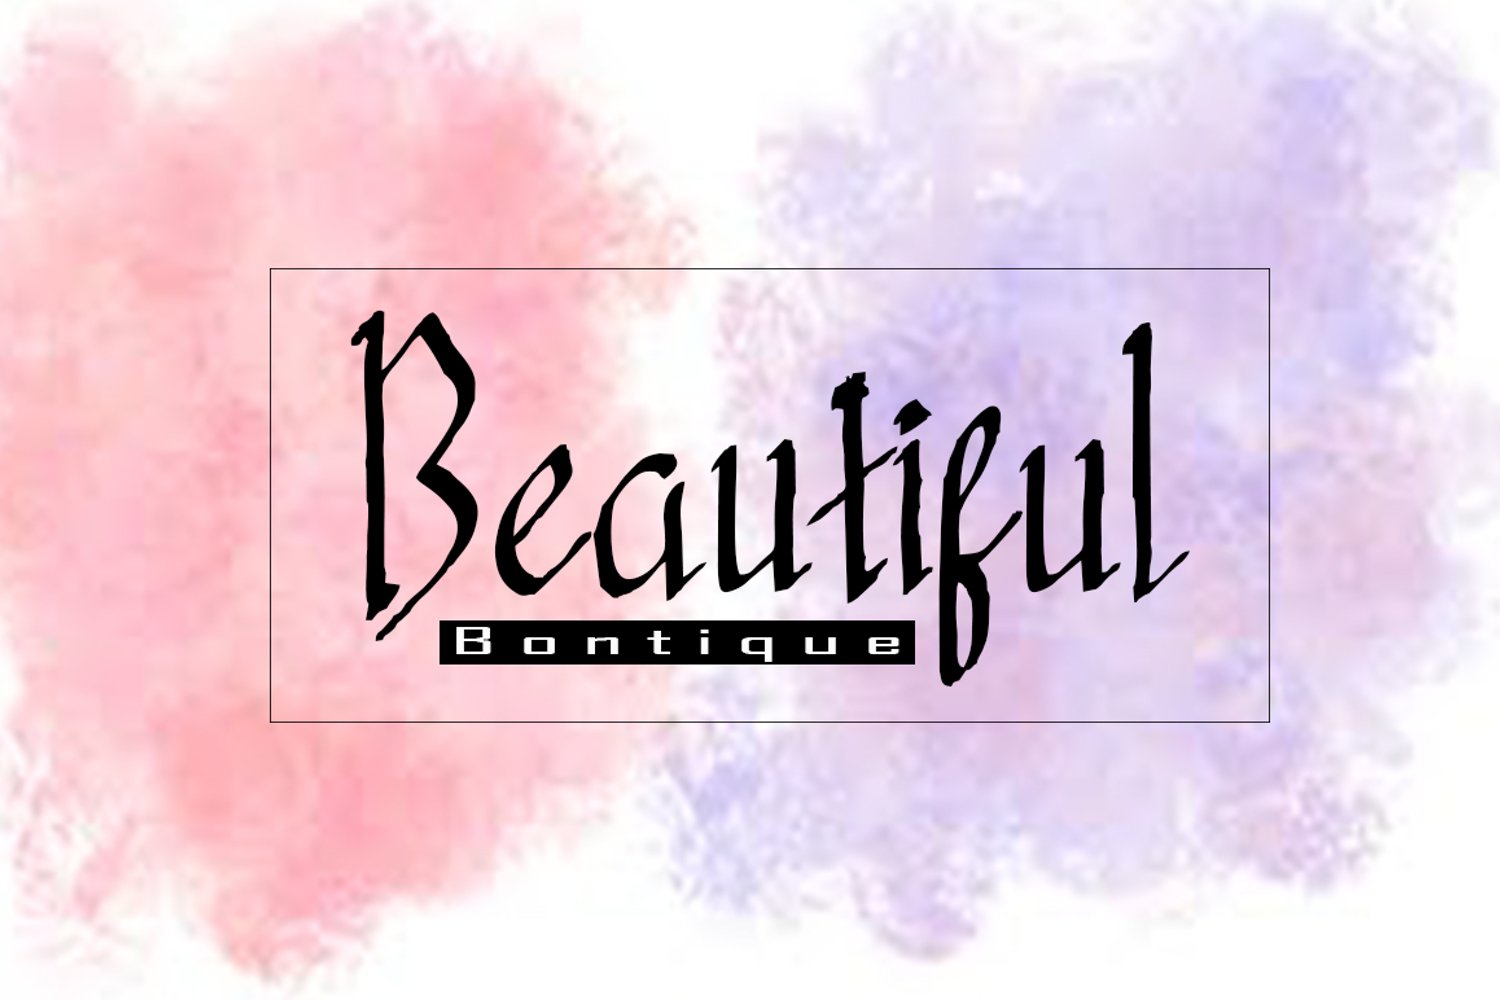 So colorful and beautiful font.